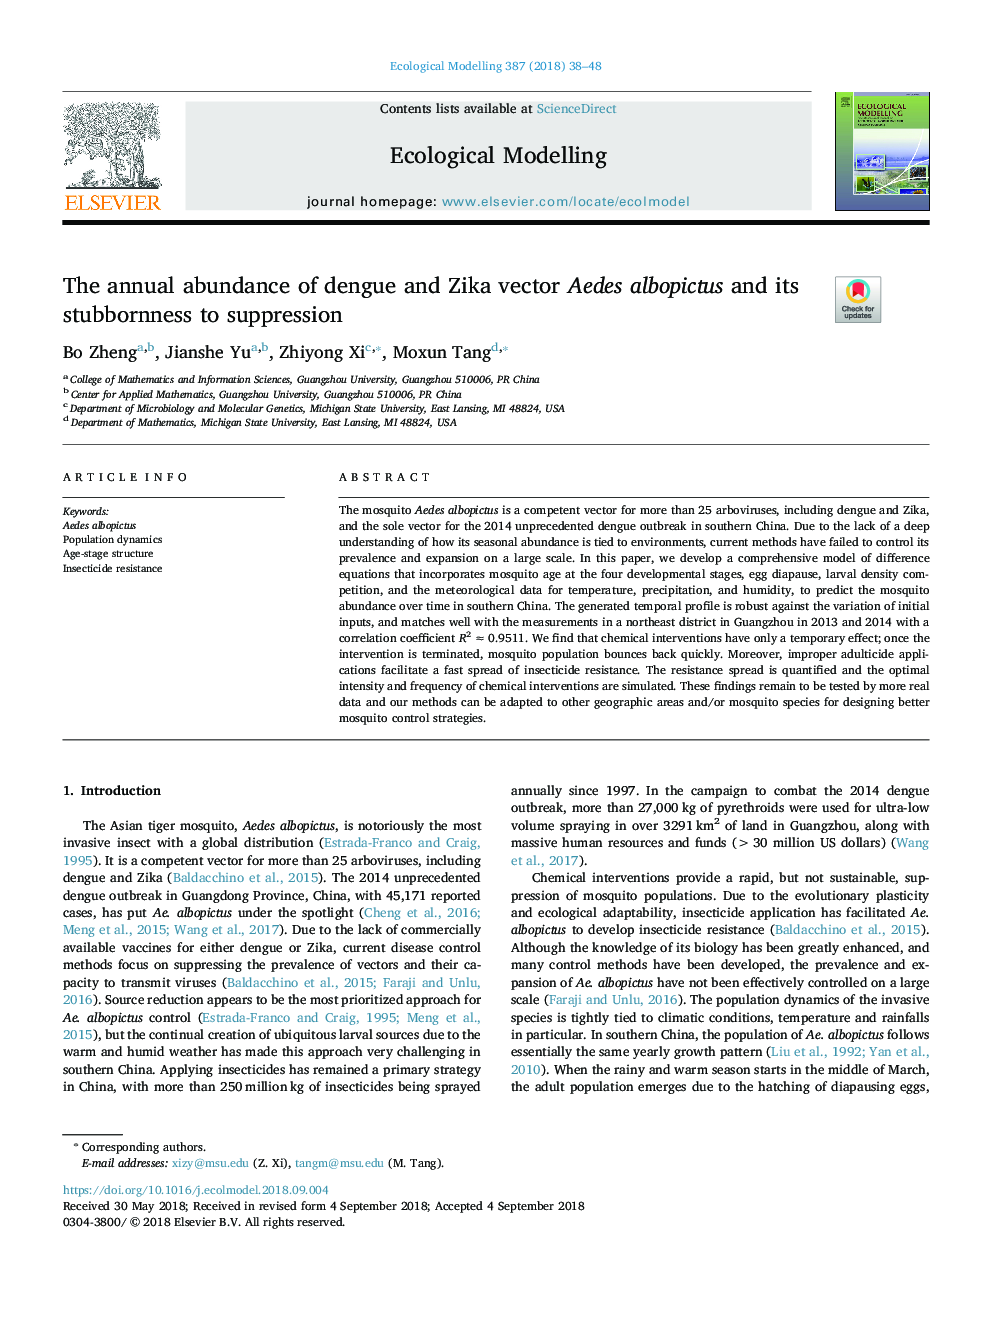 The annual abundance of dengue and Zika vector Aedes albopictus and its stubbornness to suppression